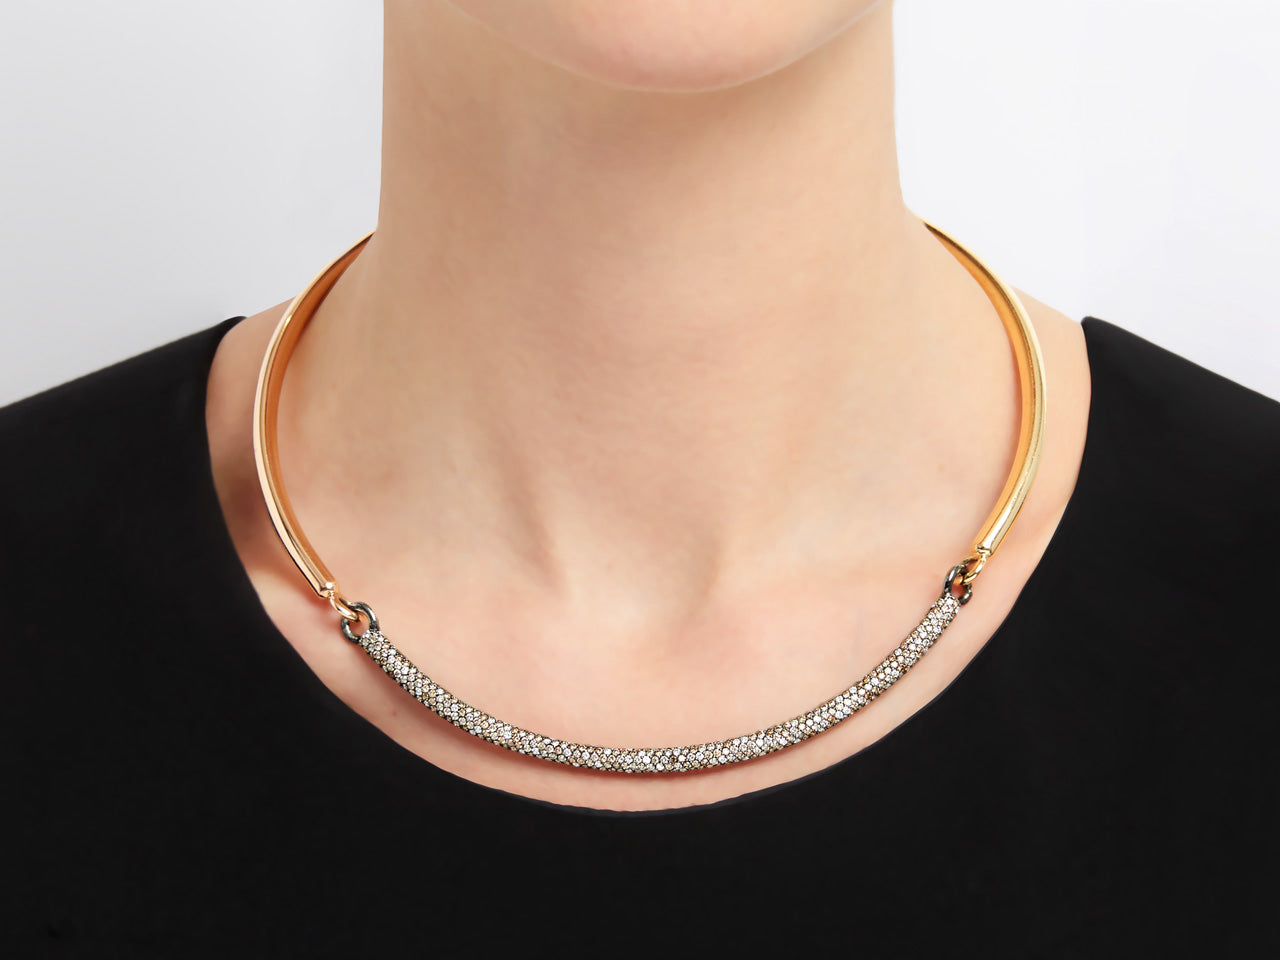 'Tri-Bar Choker' Necklace in 18K Rose, Yellow Gold and Blackened Silver, by Spinelli Kilcollin